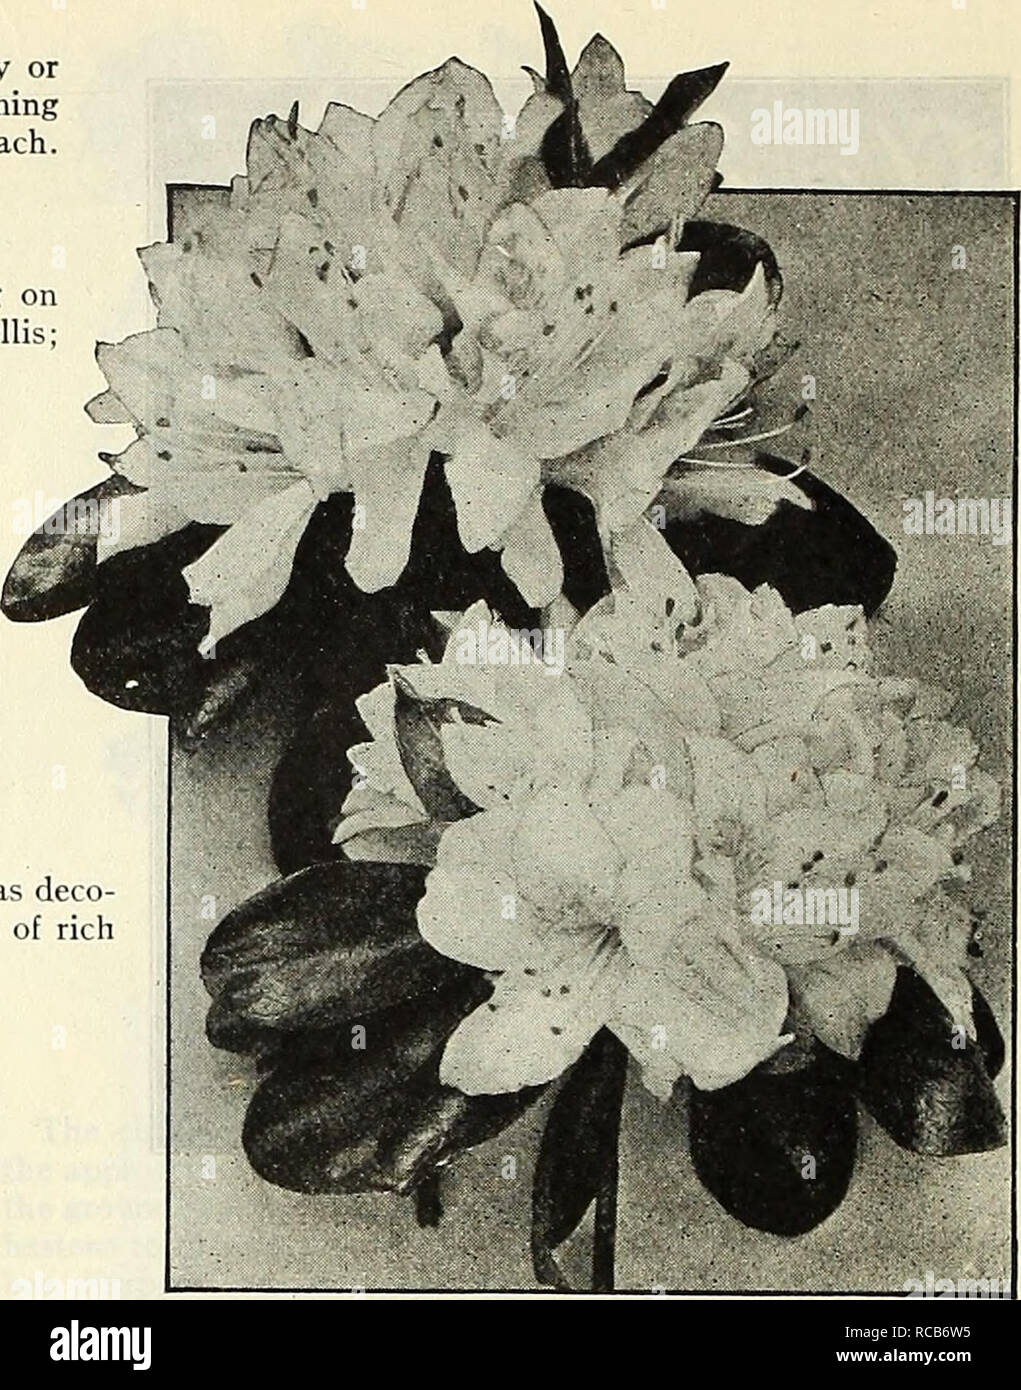 . Dreer's autumn catalogue 1927. Bulbs (Plants) Catalogs; Flowers Seeds Catalogs; Gardening Equipment and supplies Catalogs; Nurseries (Horticulture) Catalogs; Vegetables Seeds Catalogs. Select Flowering and Decorative Plants for House and Conservatory Aglaonema Costatum. A dwarf-growing Aroid, suitable for the conservatory or window garden. Verj' compact, lieart-shaped leaves of dark, shining green, with white midrib and scattering blotches of white. 75 cts. each. Allatnanda Henderson!. A strong-growing variety, well suited for growing on the pillars or supports of a conservatory, or for trai Stock Photo